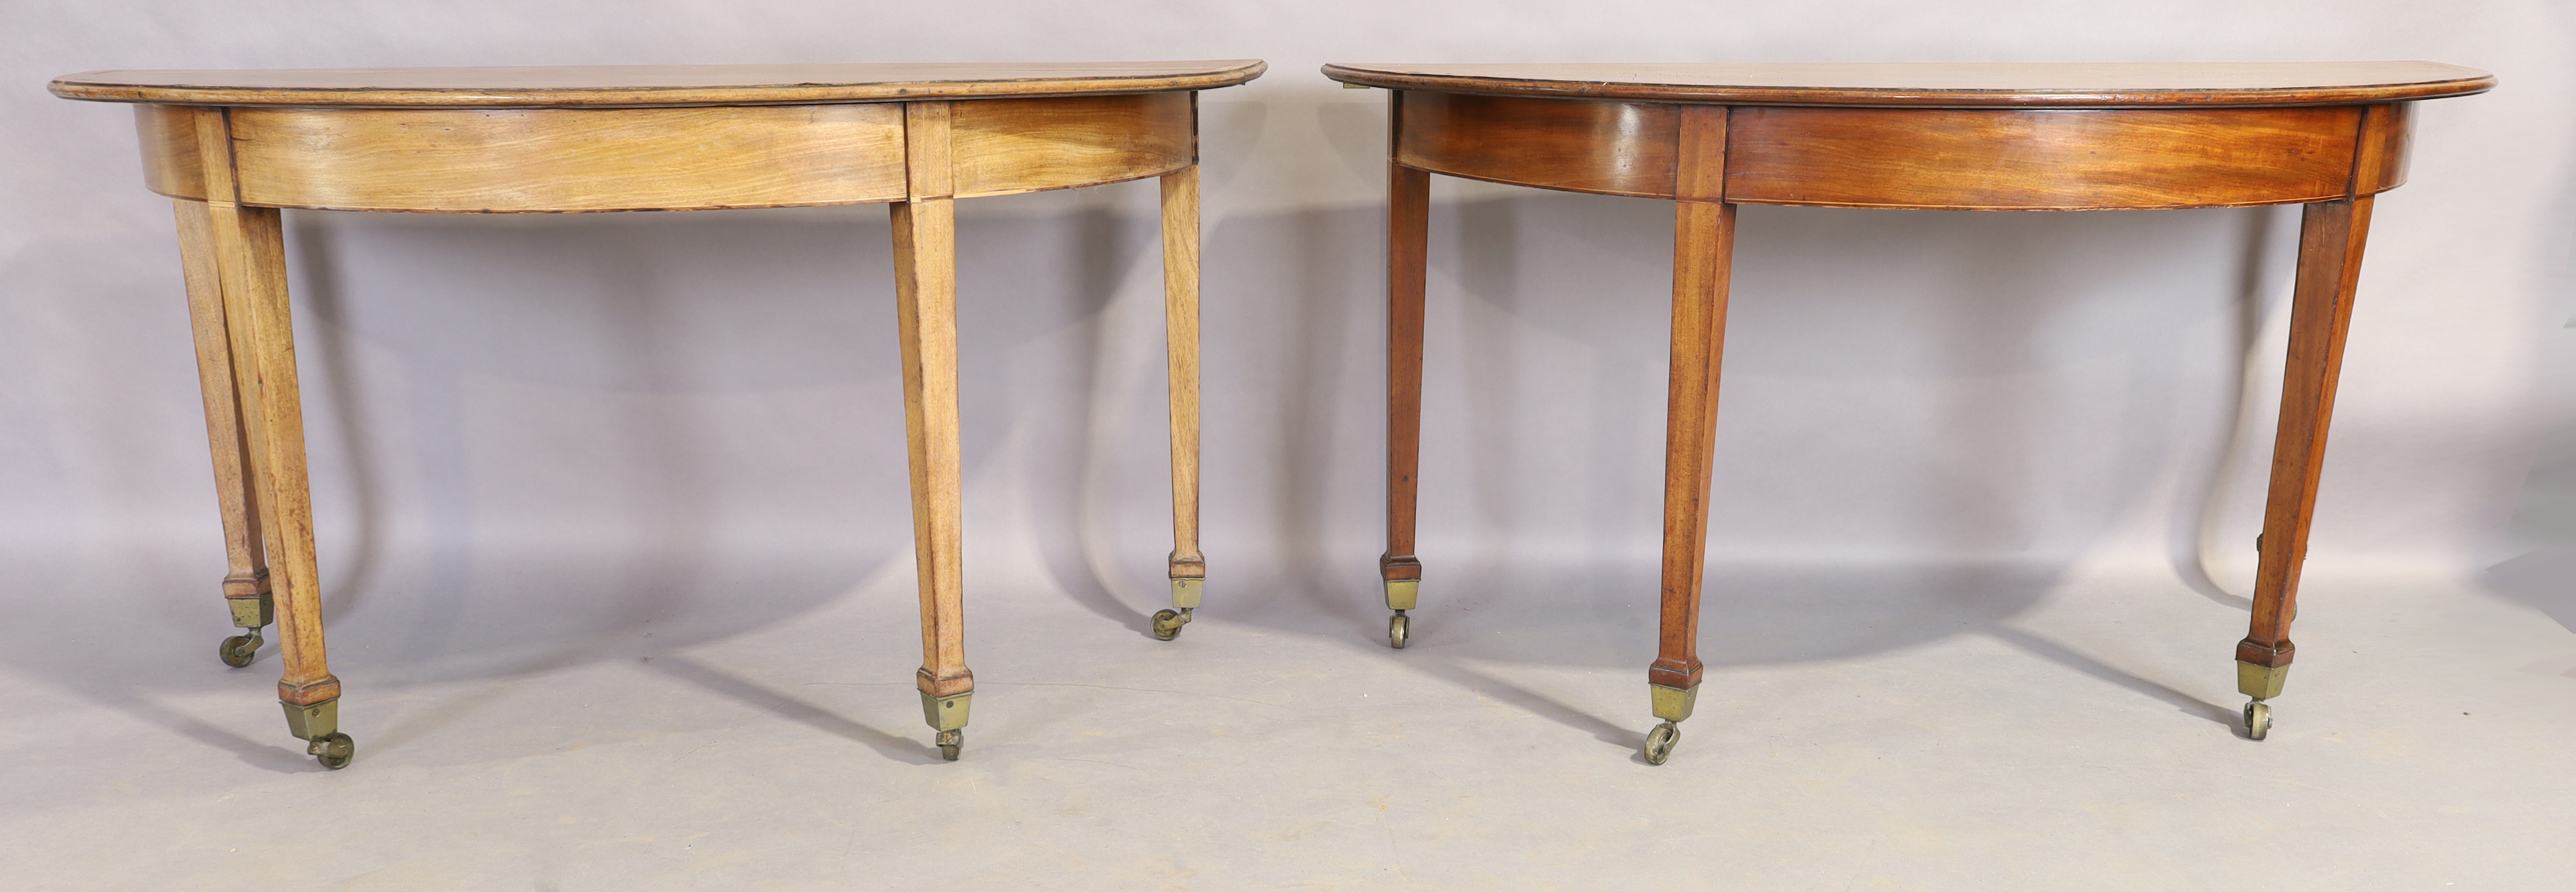 A pair of George III mahogany and satinwood crossbanded console tables, last quarter 18th century... - Image 3 of 3